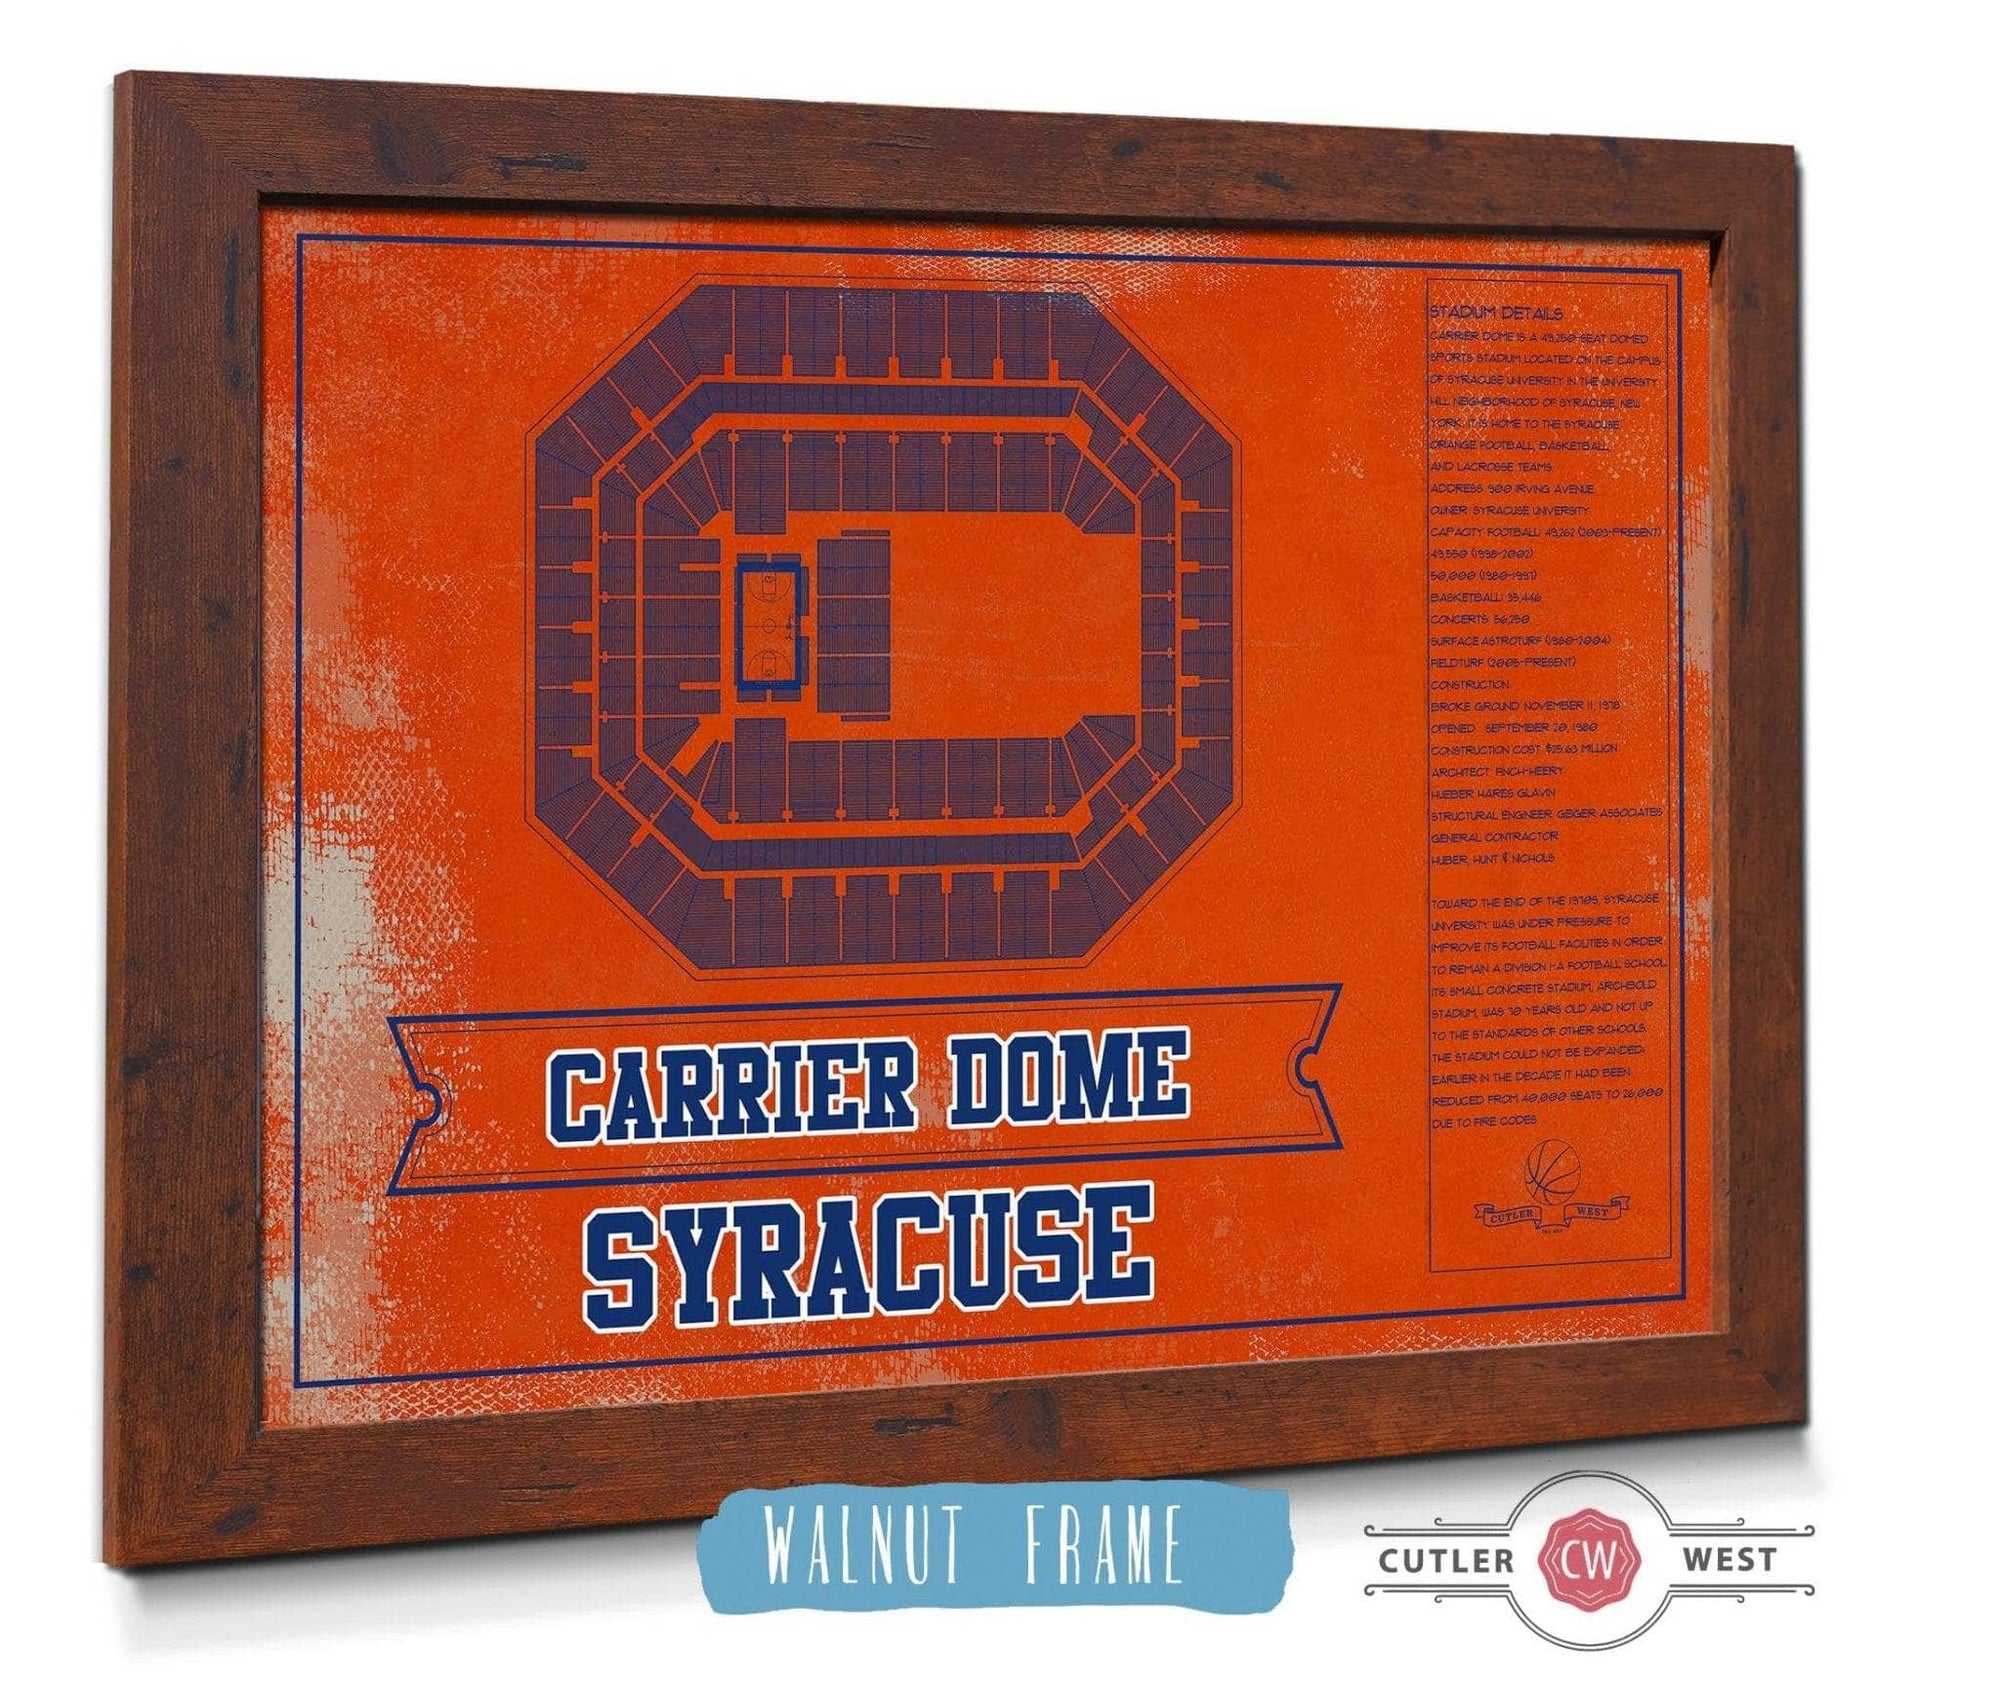 Cutler West Basketball Collection 14" x 11" / Walnut Frame Syracuse Orange - Carrier Dome Seating Chart - College Basketball Blueprint Team Color Art 918947080-TOP